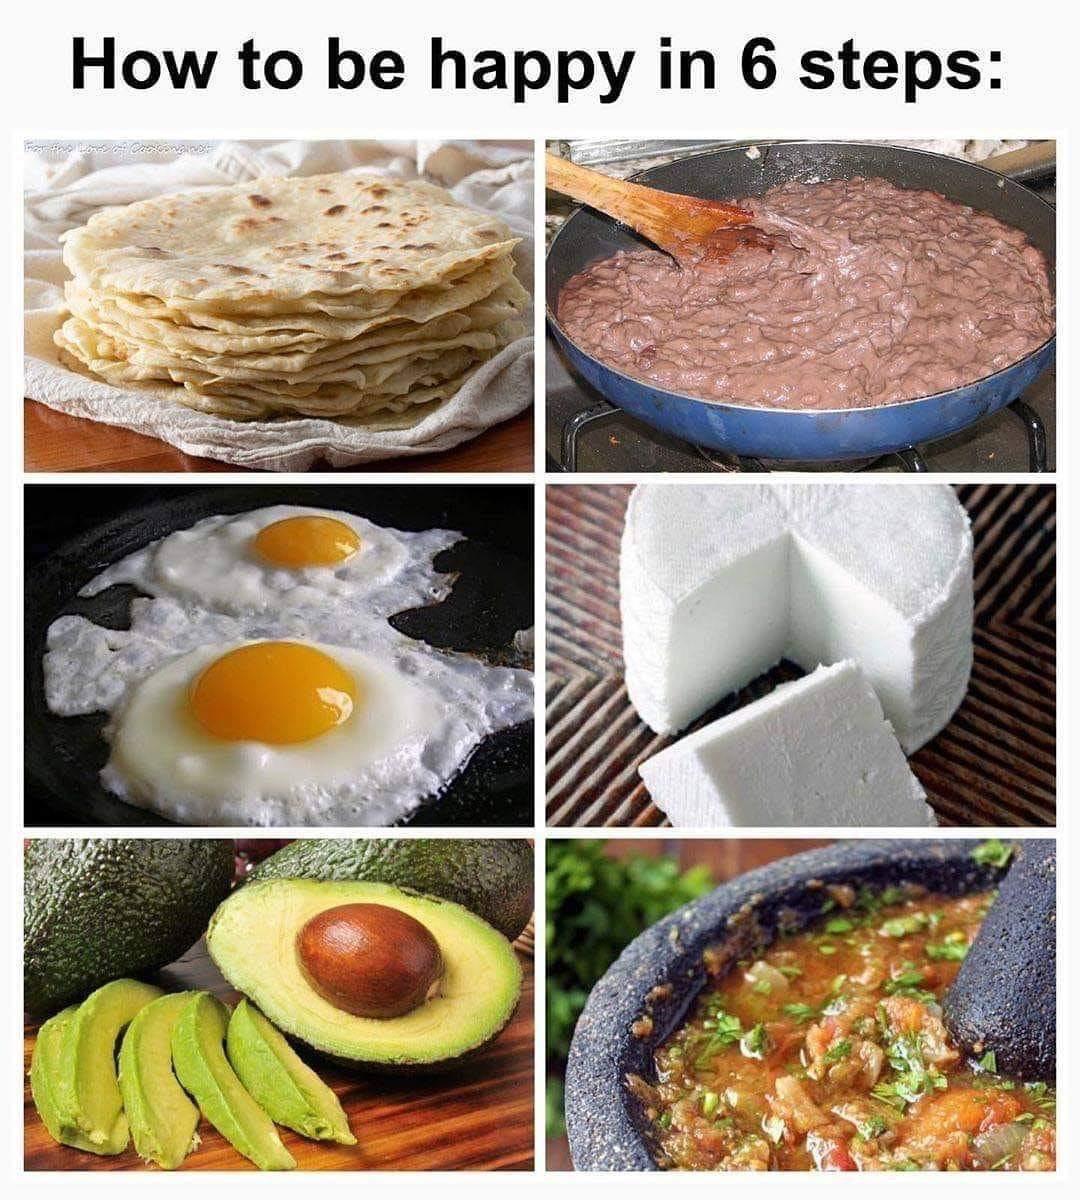 daily dose of pics and memes - dish - How to be happy in 6 steps For fas